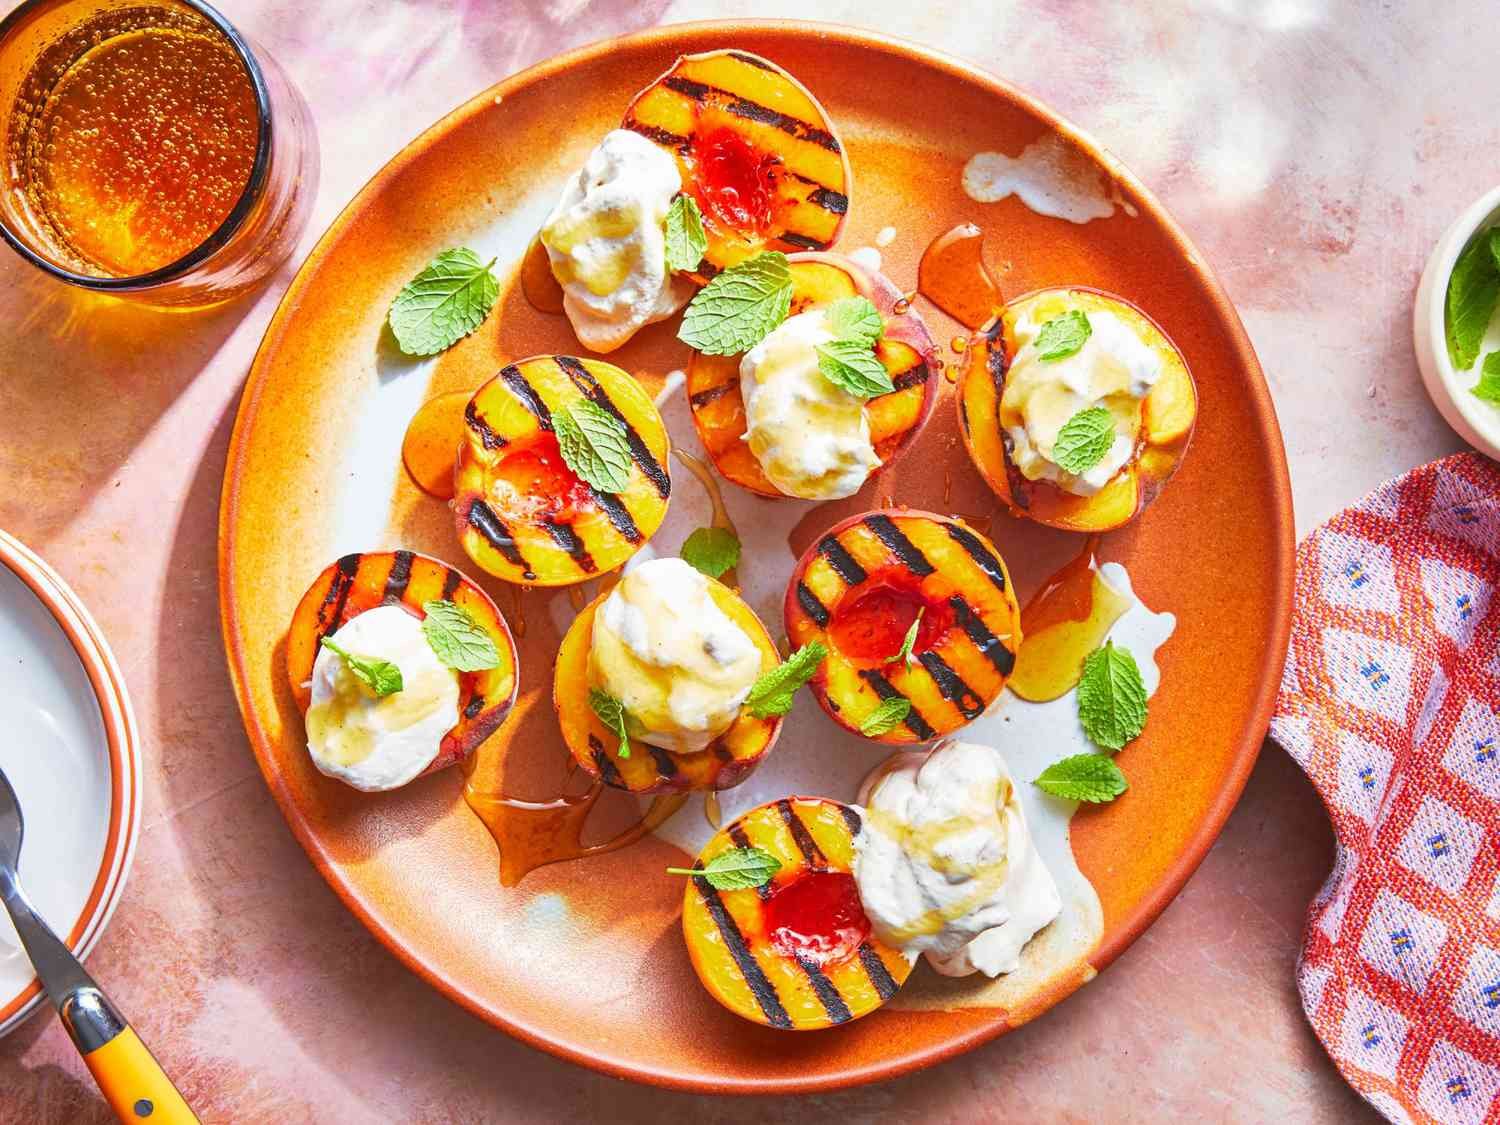 Delicious Grilled Fruit Recipes To Try Next Time You Fire Up The Grill